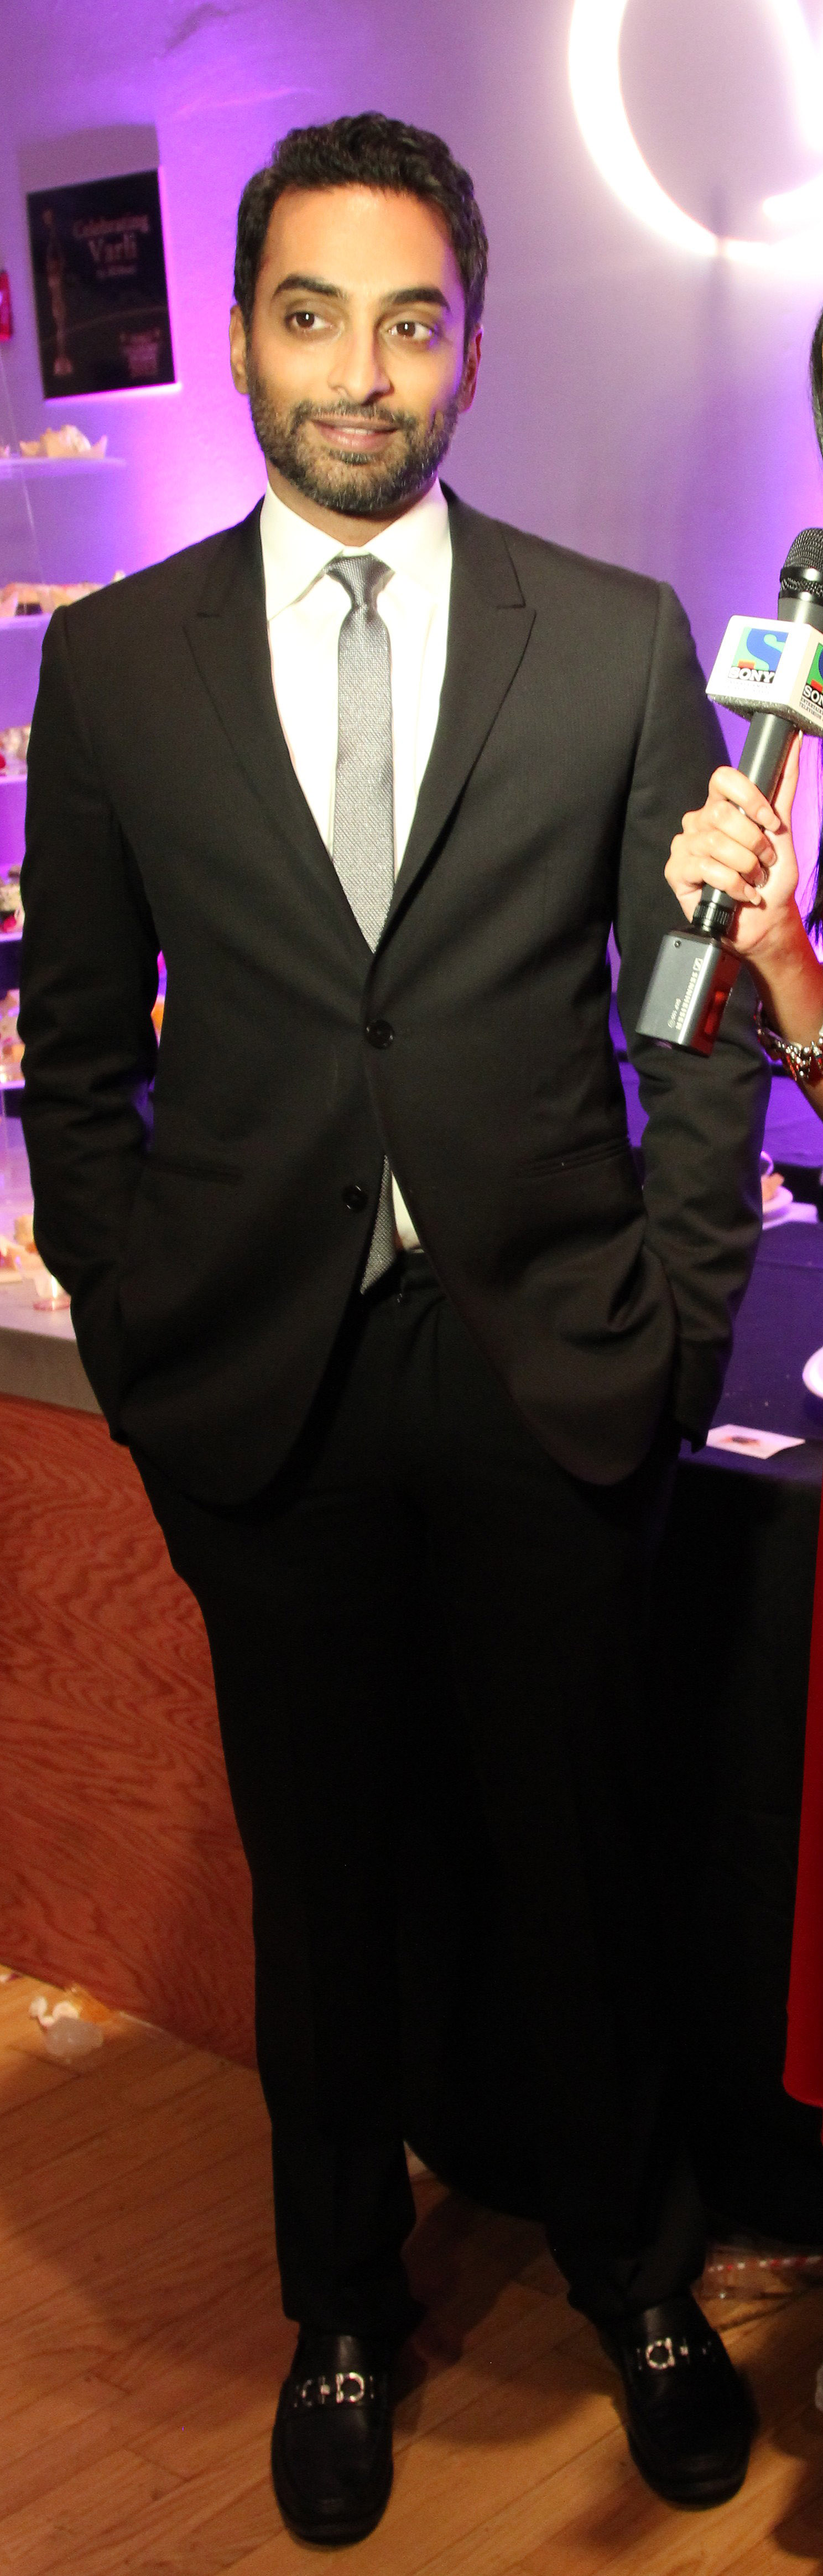 November 15, 2012: Actor Manu Narayan, co-host of the First Annual Varli Culinary Awards during an interview by Sony TV-Asia at The Altman Building in New York City.